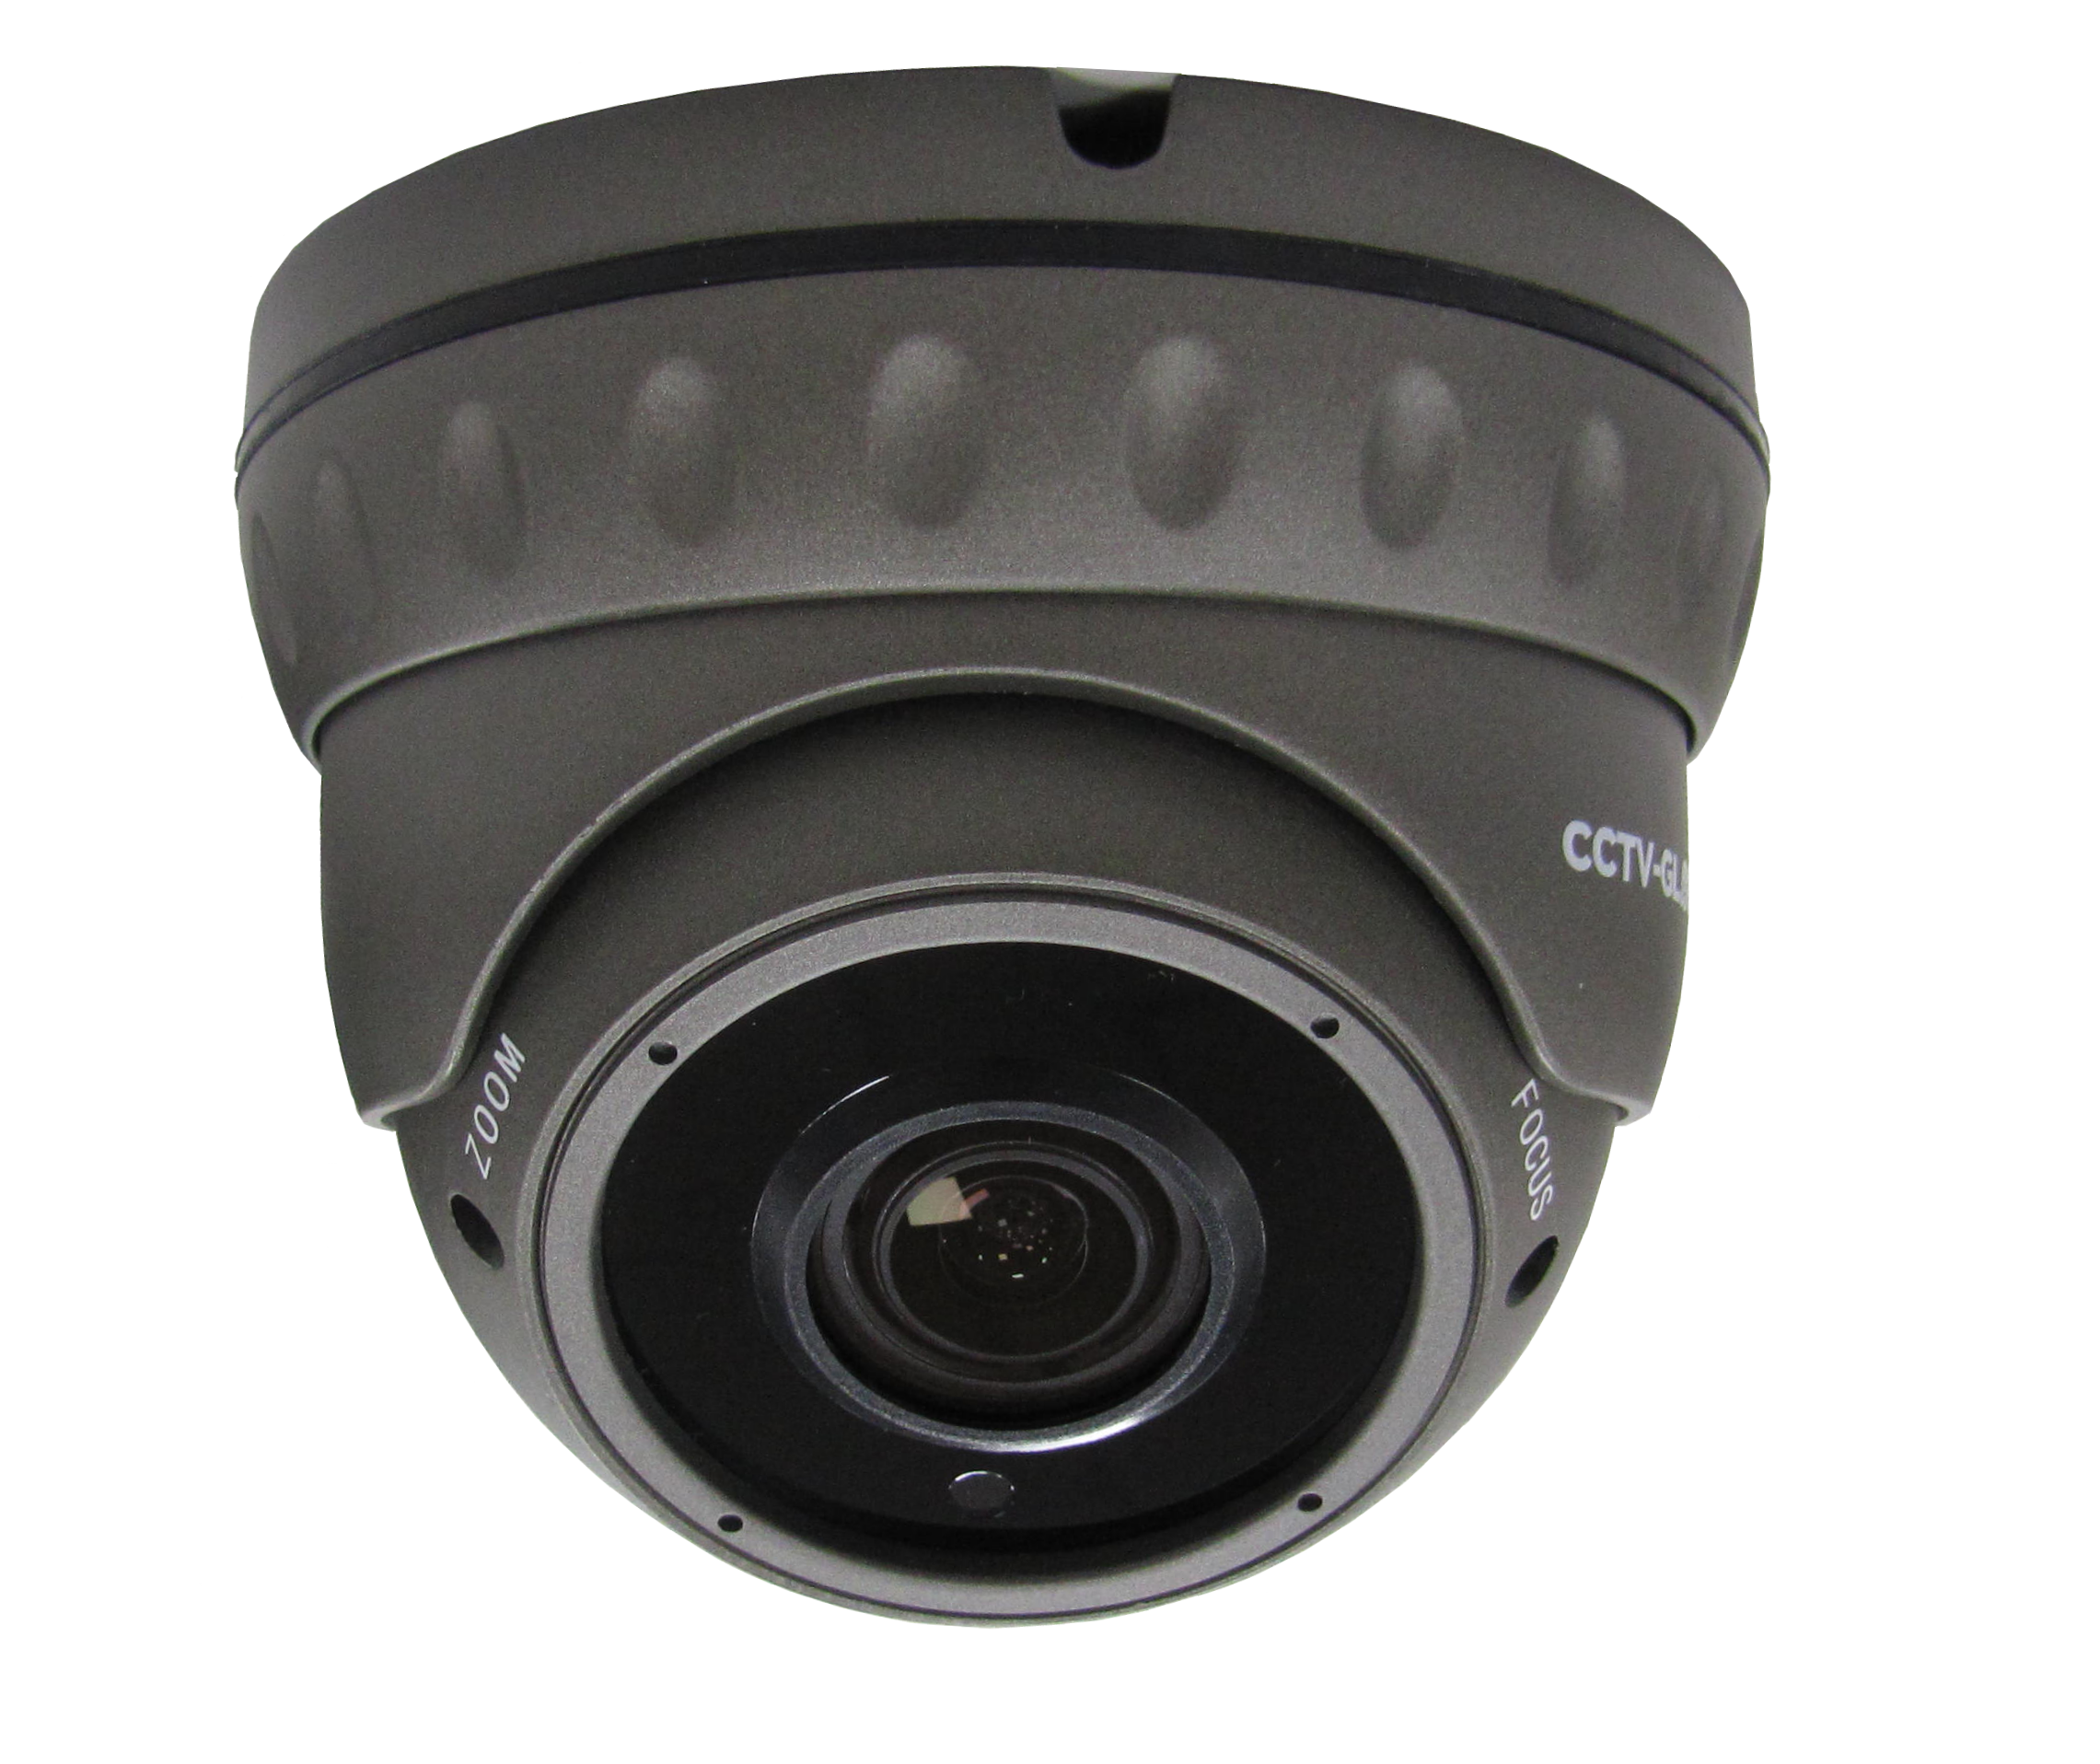 Cctv Dome Camera Picture HQ Image Free PNG PNG Image